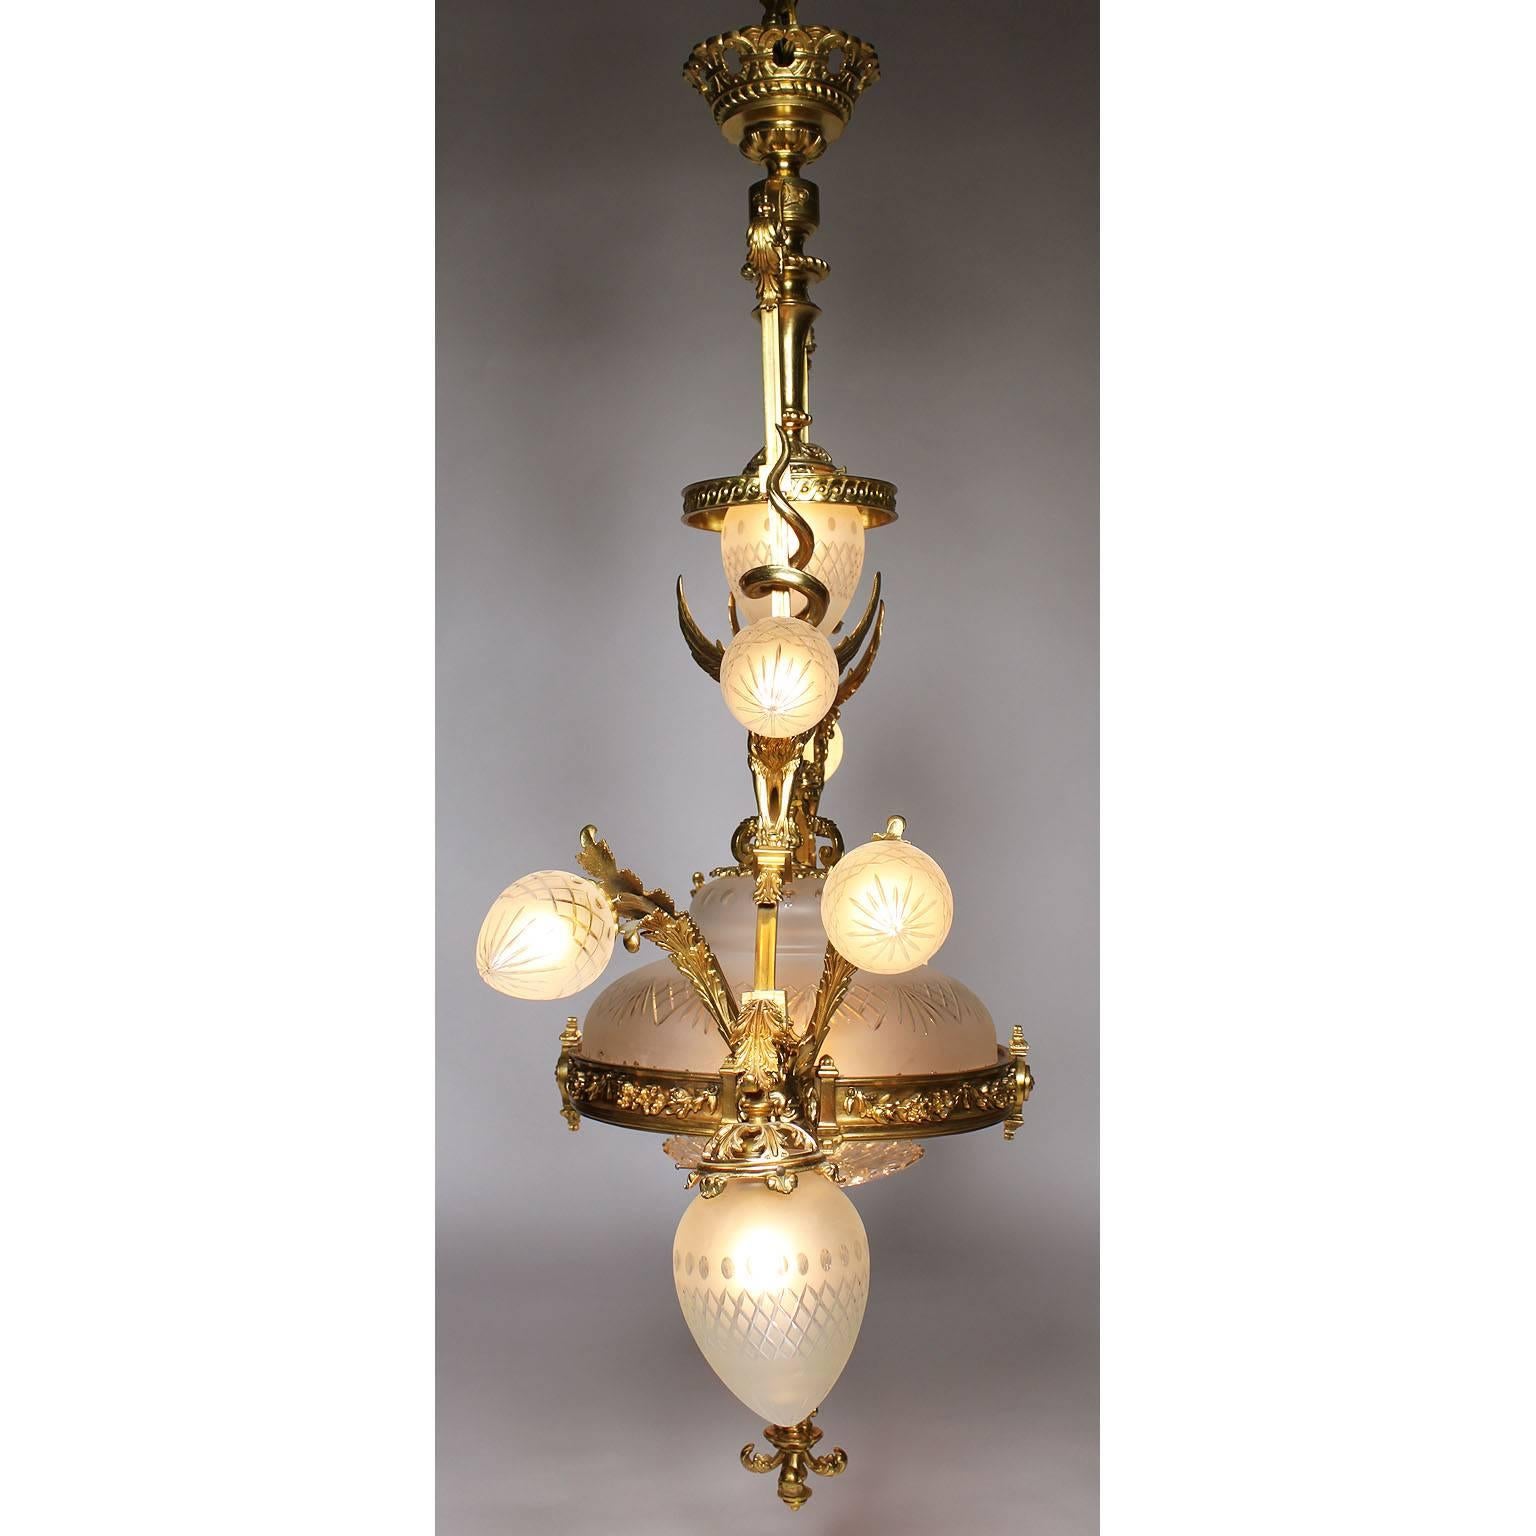 French Belle Epoque 19th-20th Century Neoclassical Style Gilt-Bronze Chandelier For Sale 4